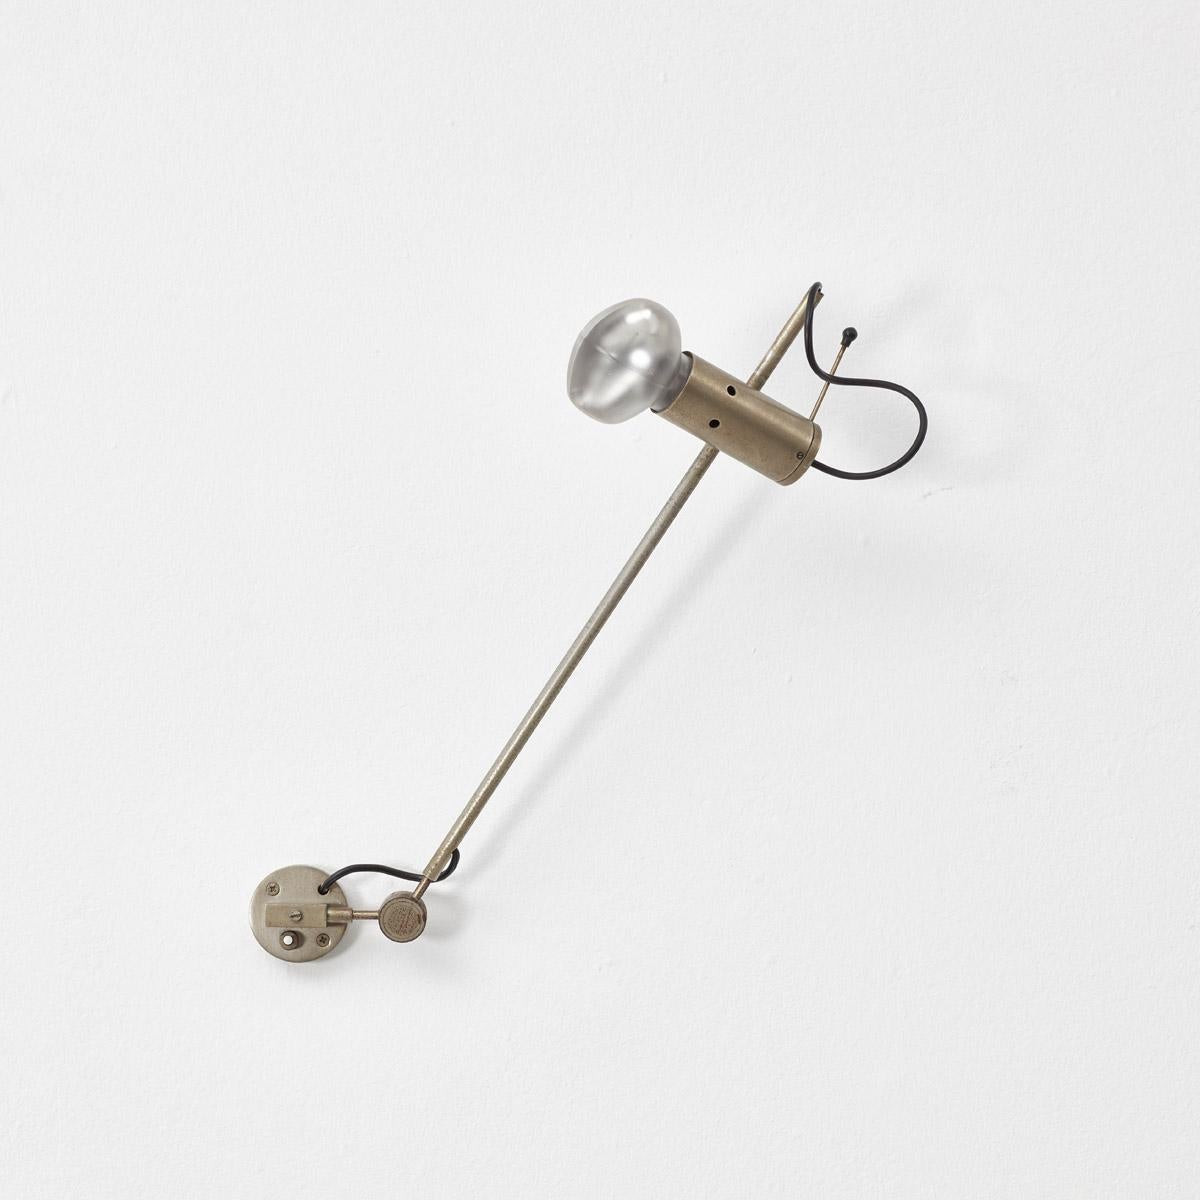 The Model 194 wall lamp is a rare piece by Tito Agnoli for Oluce, Italy 1954. This in an early edition, featuring nickel-plated steel arms and hardware, with an original Cornalux ‘hammerhead’ light bulb. This design is distinctive for its